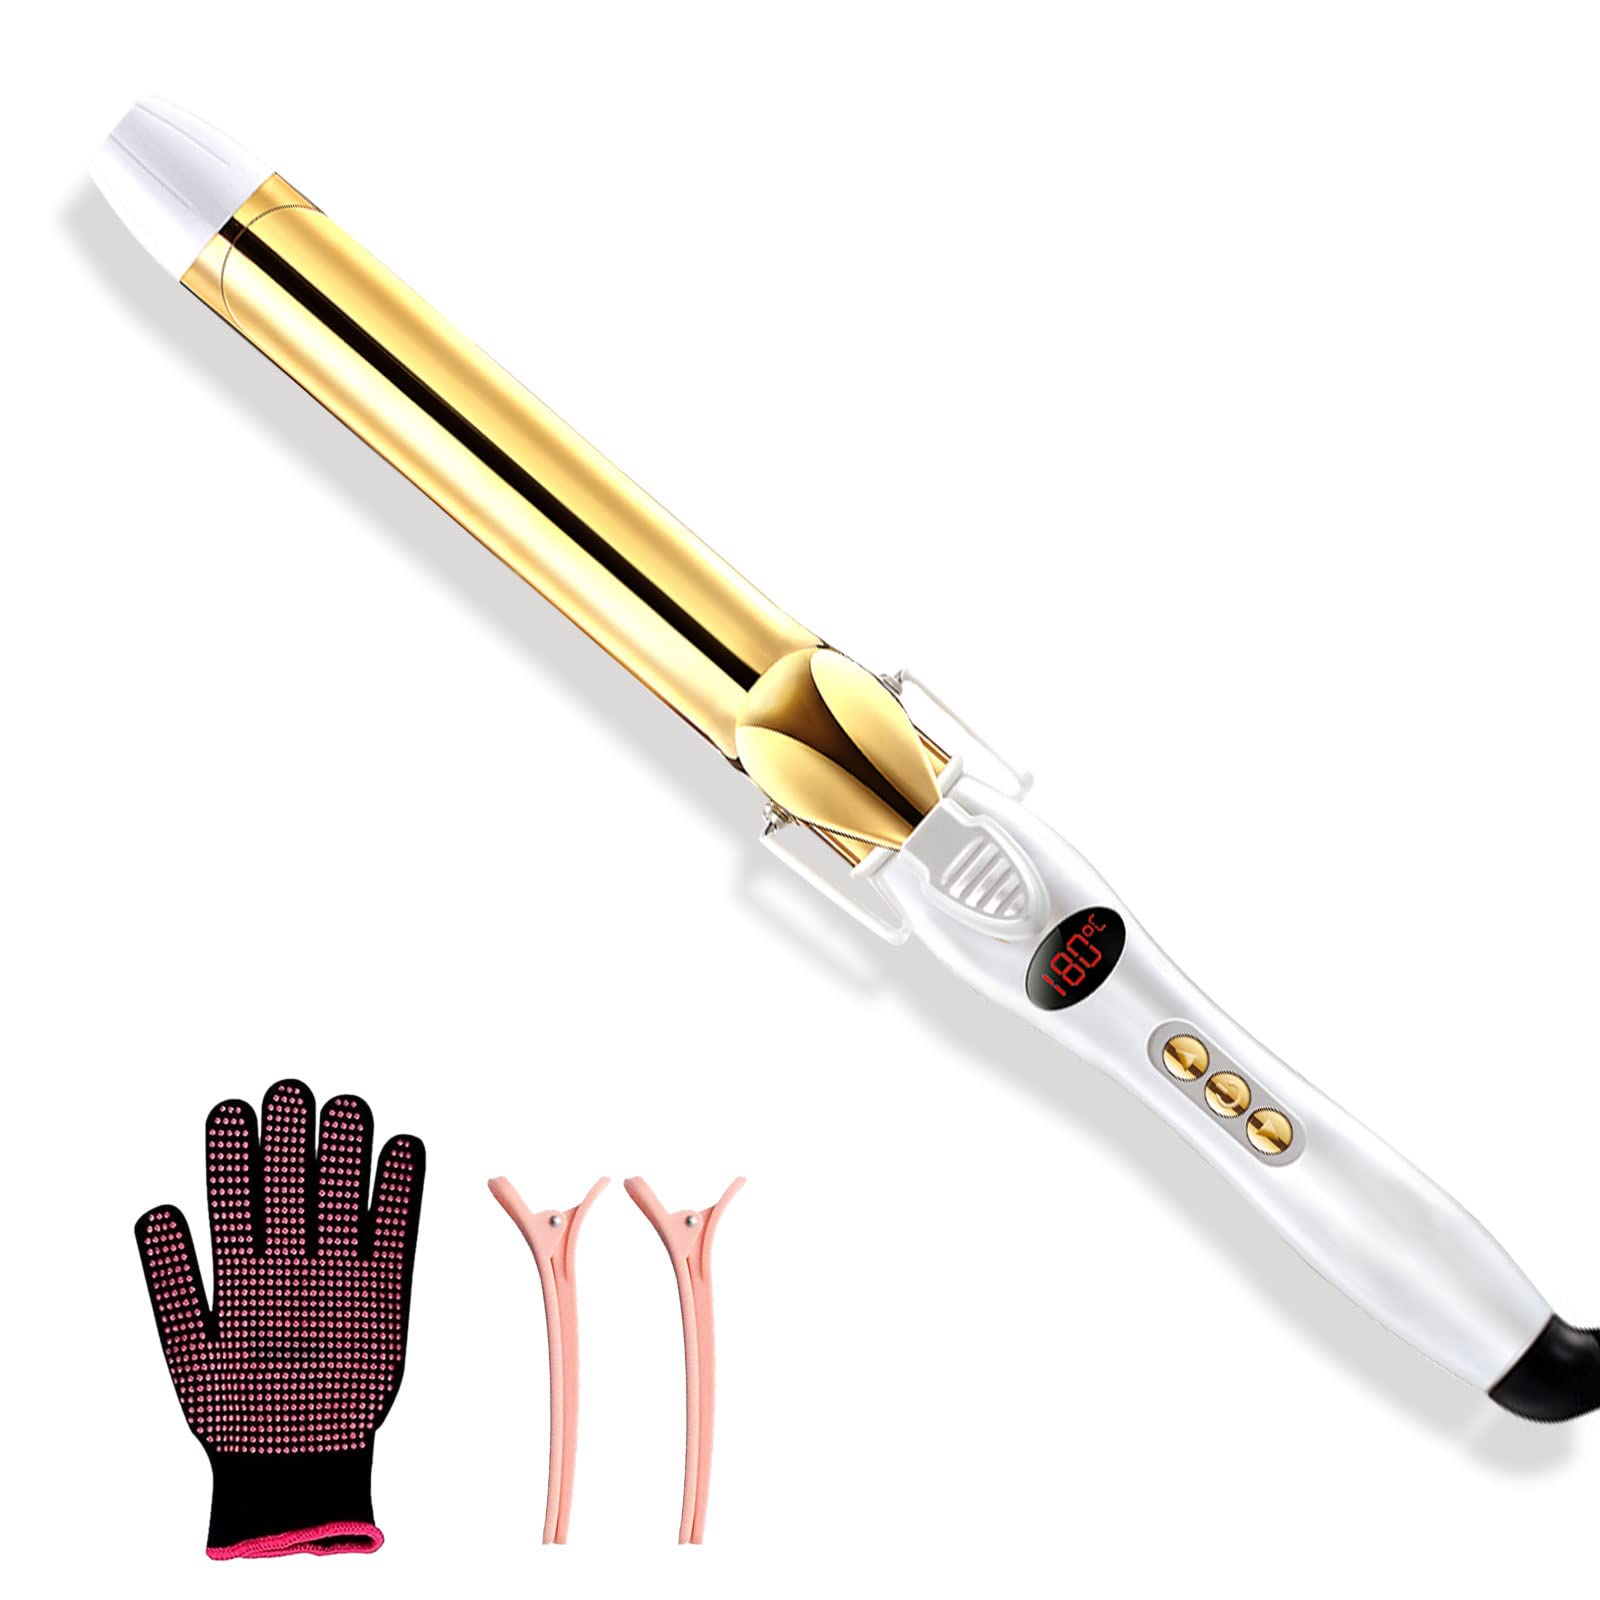 Rosy Forth Curling Iron 32mm with Ceramic Coating Barrel, Professional Curling Wand Instant Heat up, Gold Hair Curler with LCD Display (OPEN-BOX)